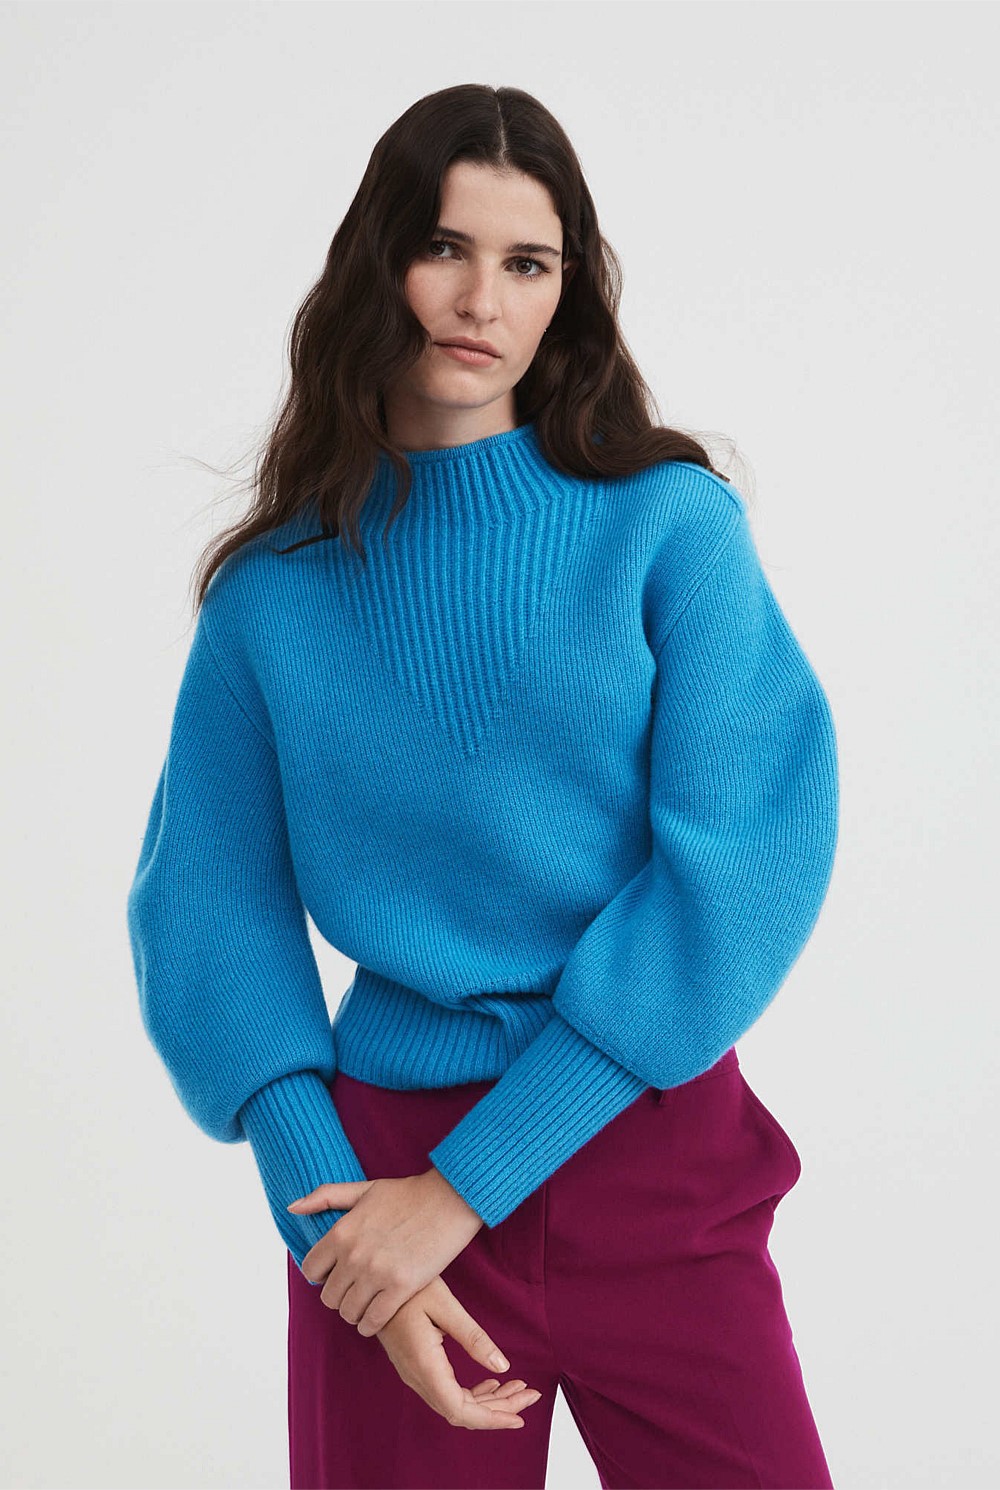 Jumpers & Sweaters - Shop Women's Jumpers Online - Witchery